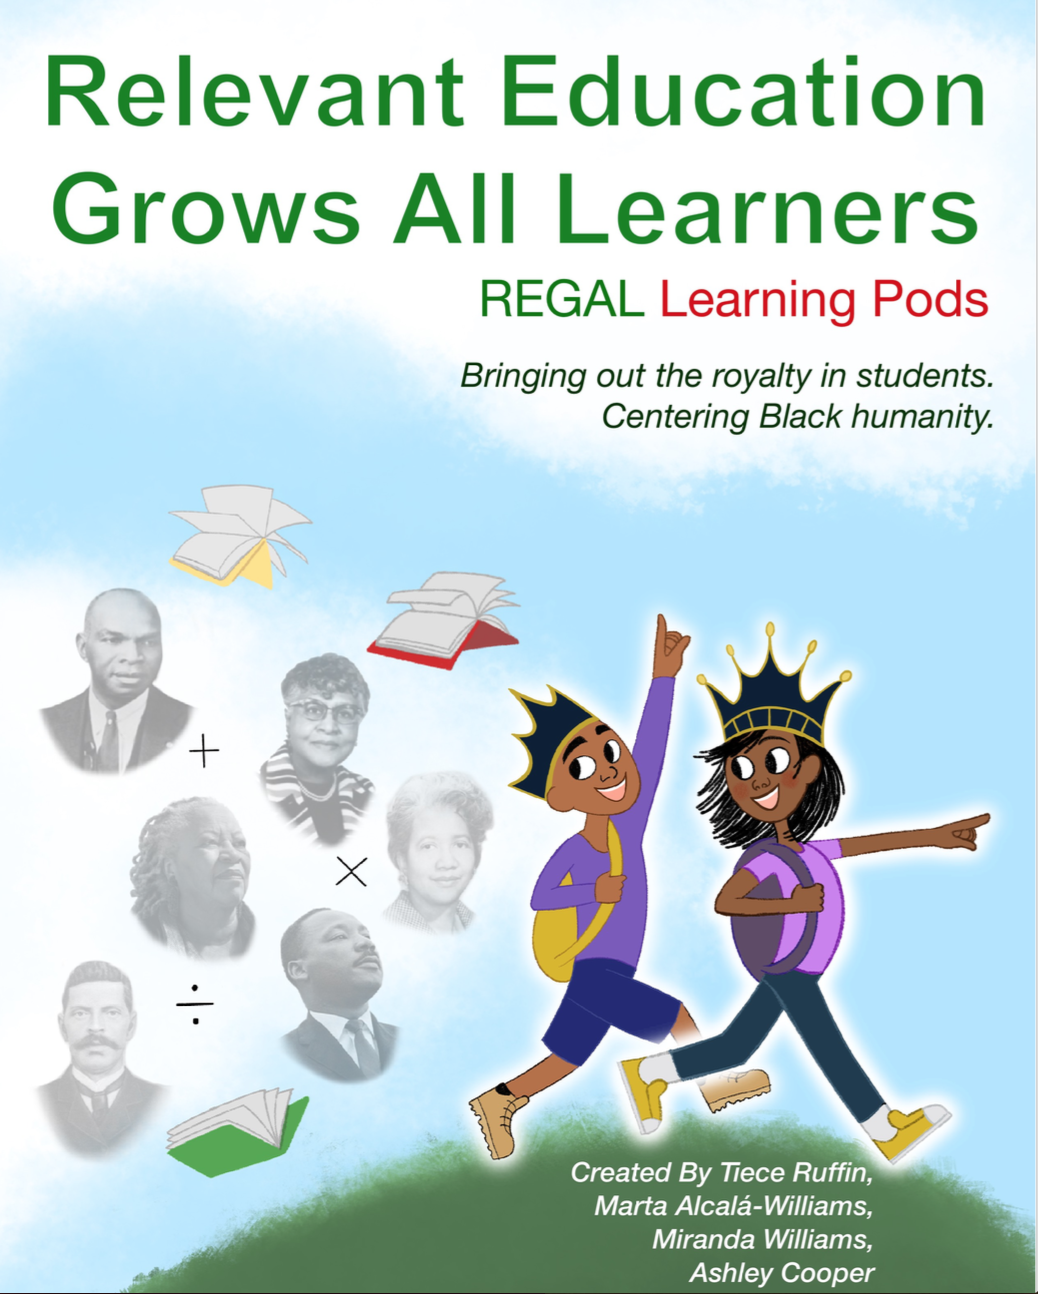 New Publication: Relevant Education Grows All Learners REGAL